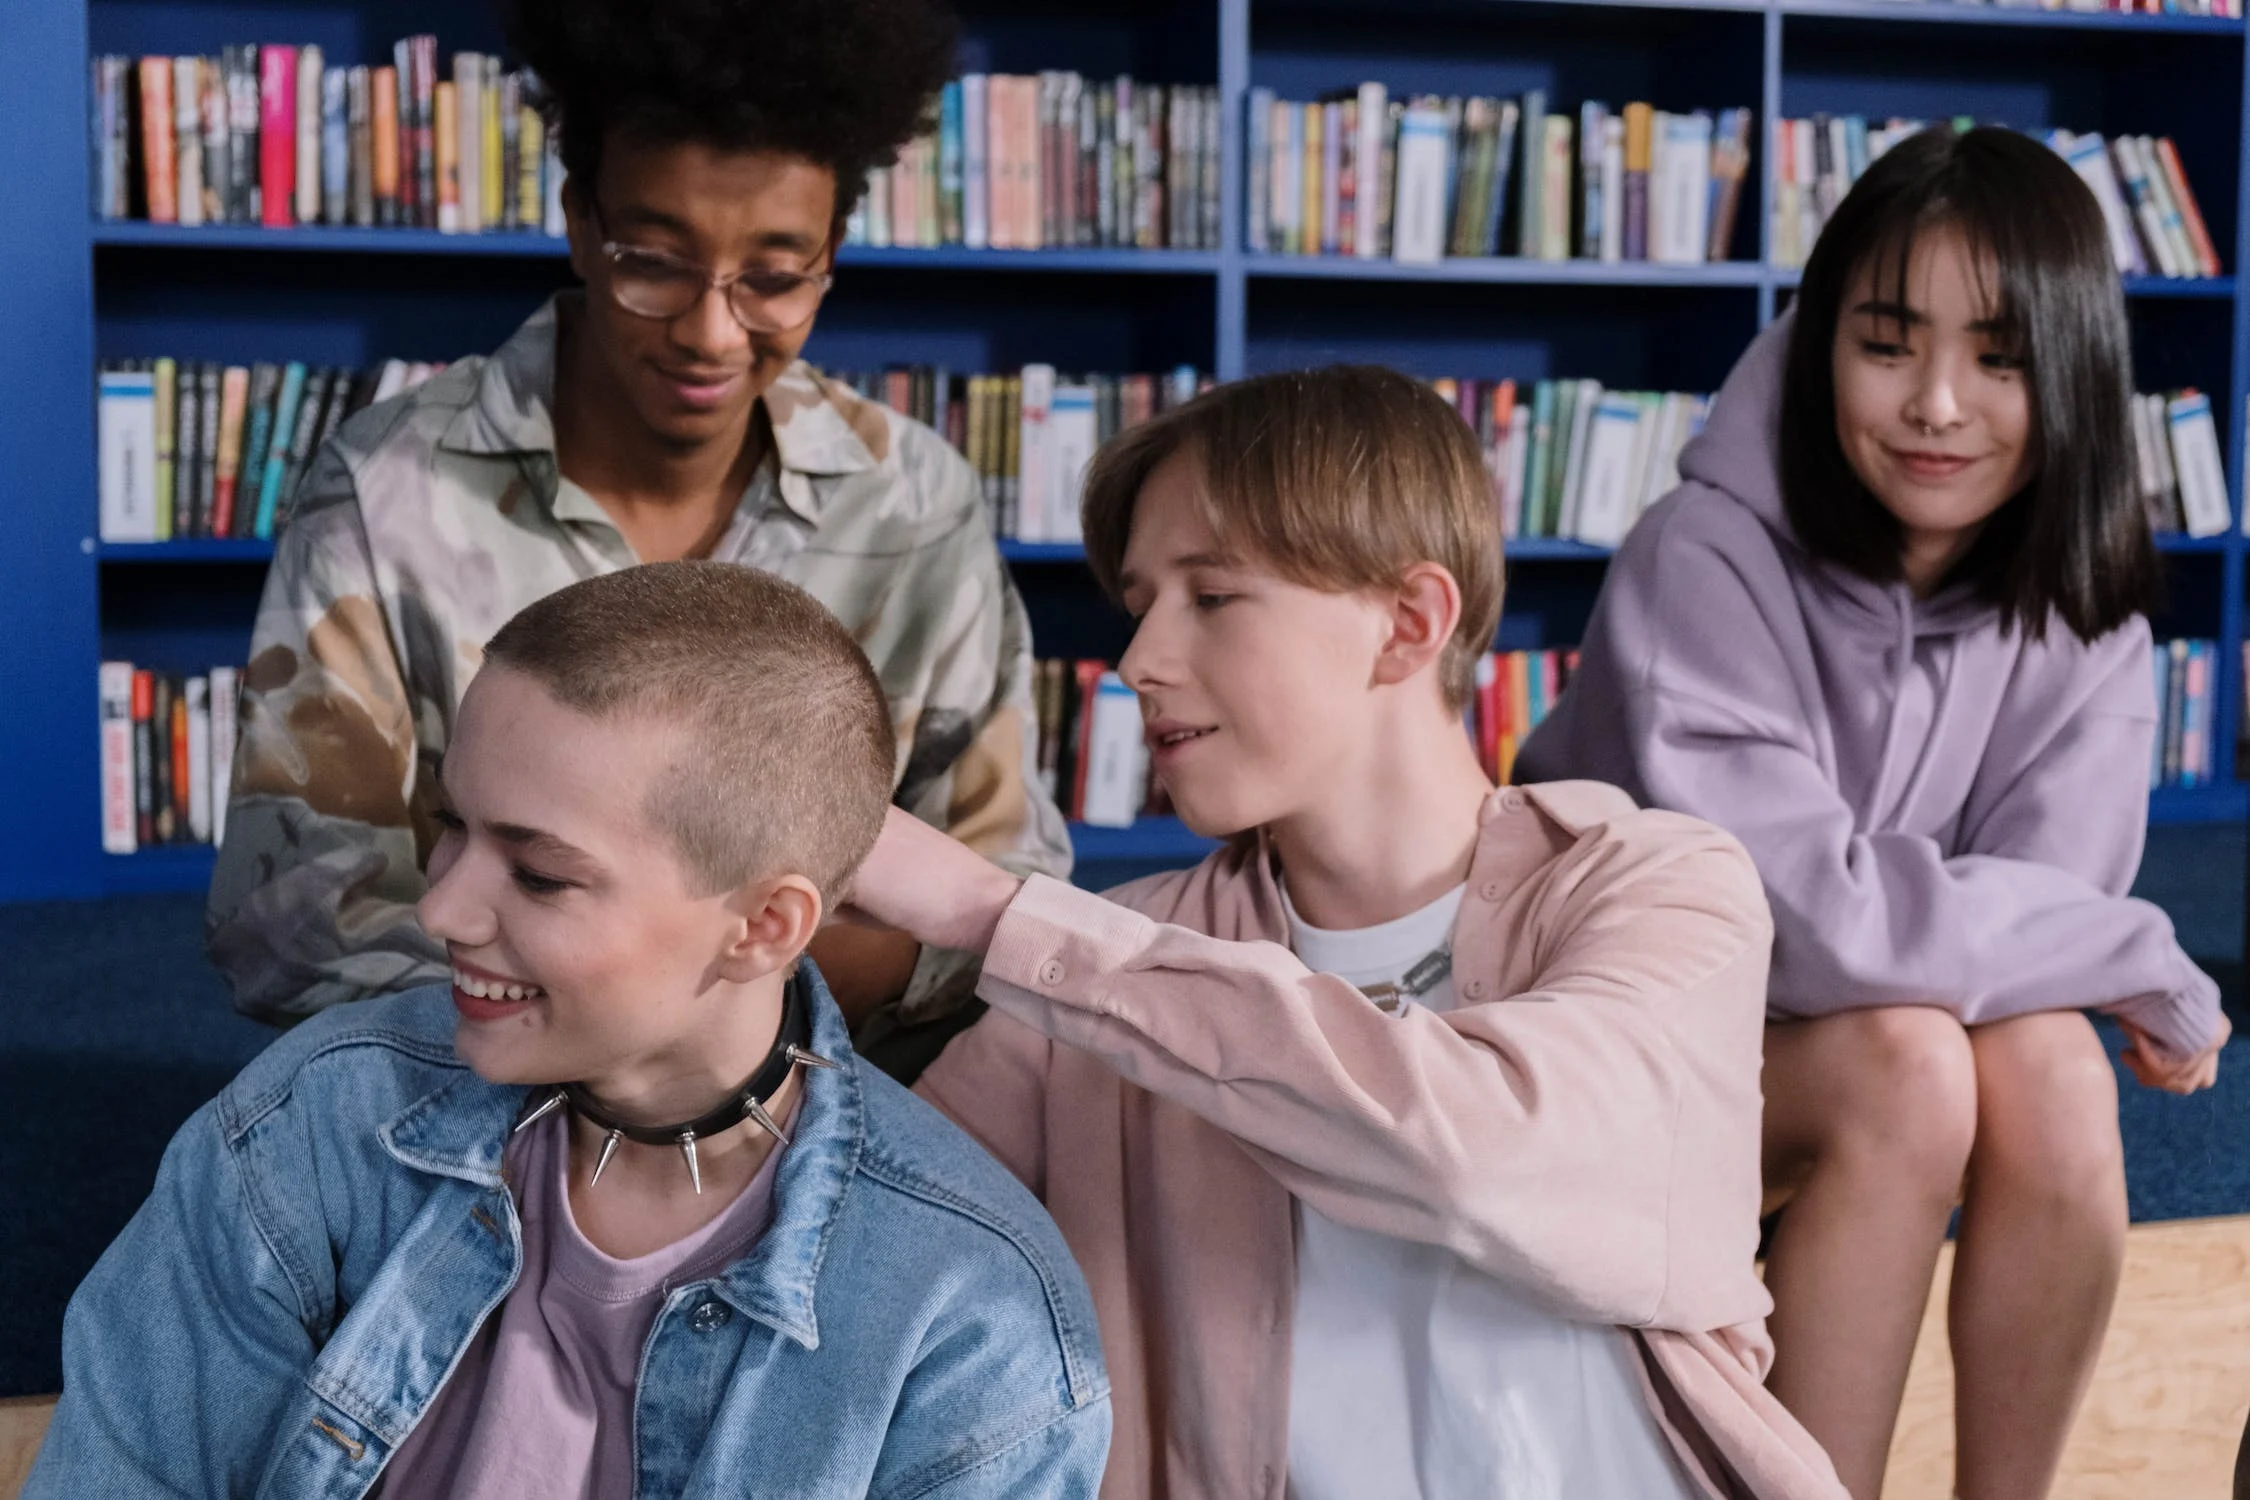 Male and female students of mixed ethnicity in a high school library joking around. One female student has a studded collar around her neck/